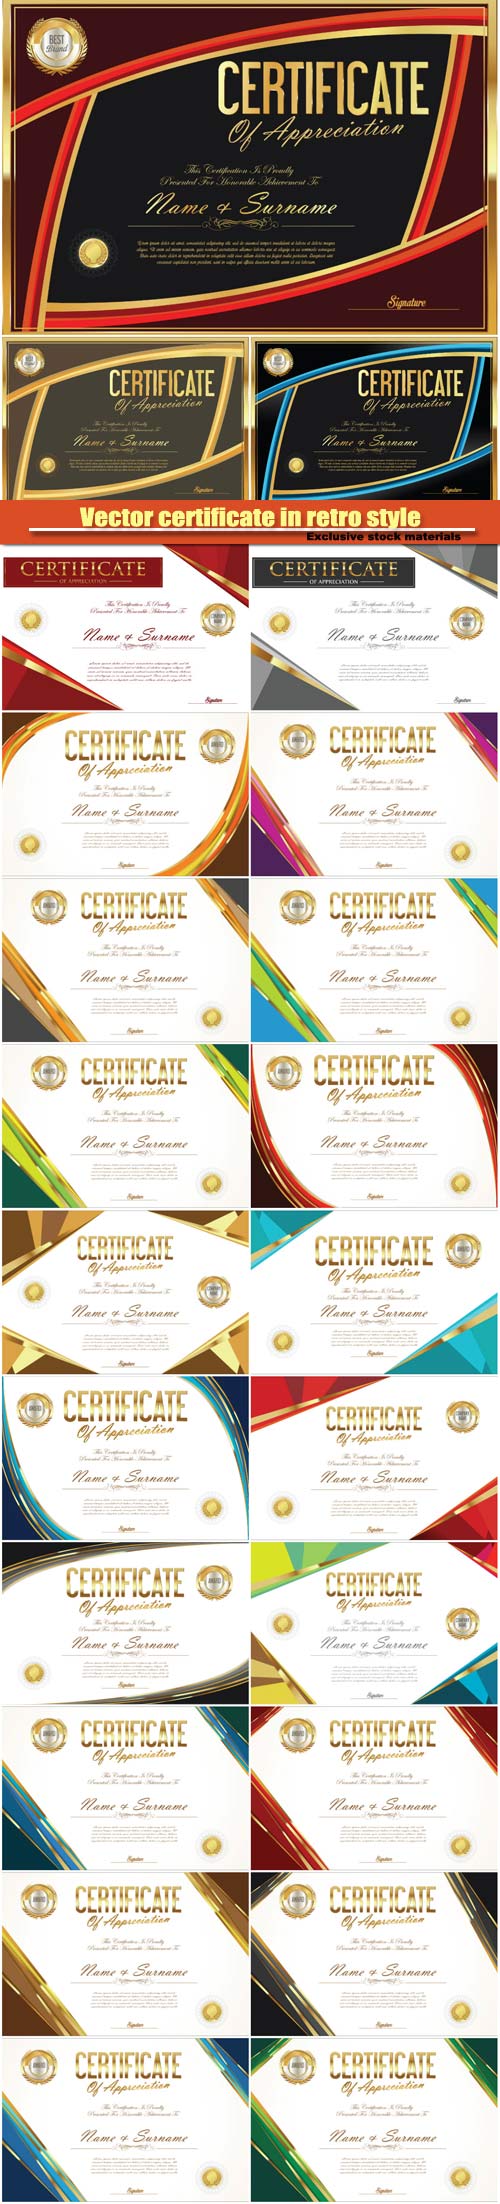 Vector certificate with a gold design in retro style #4